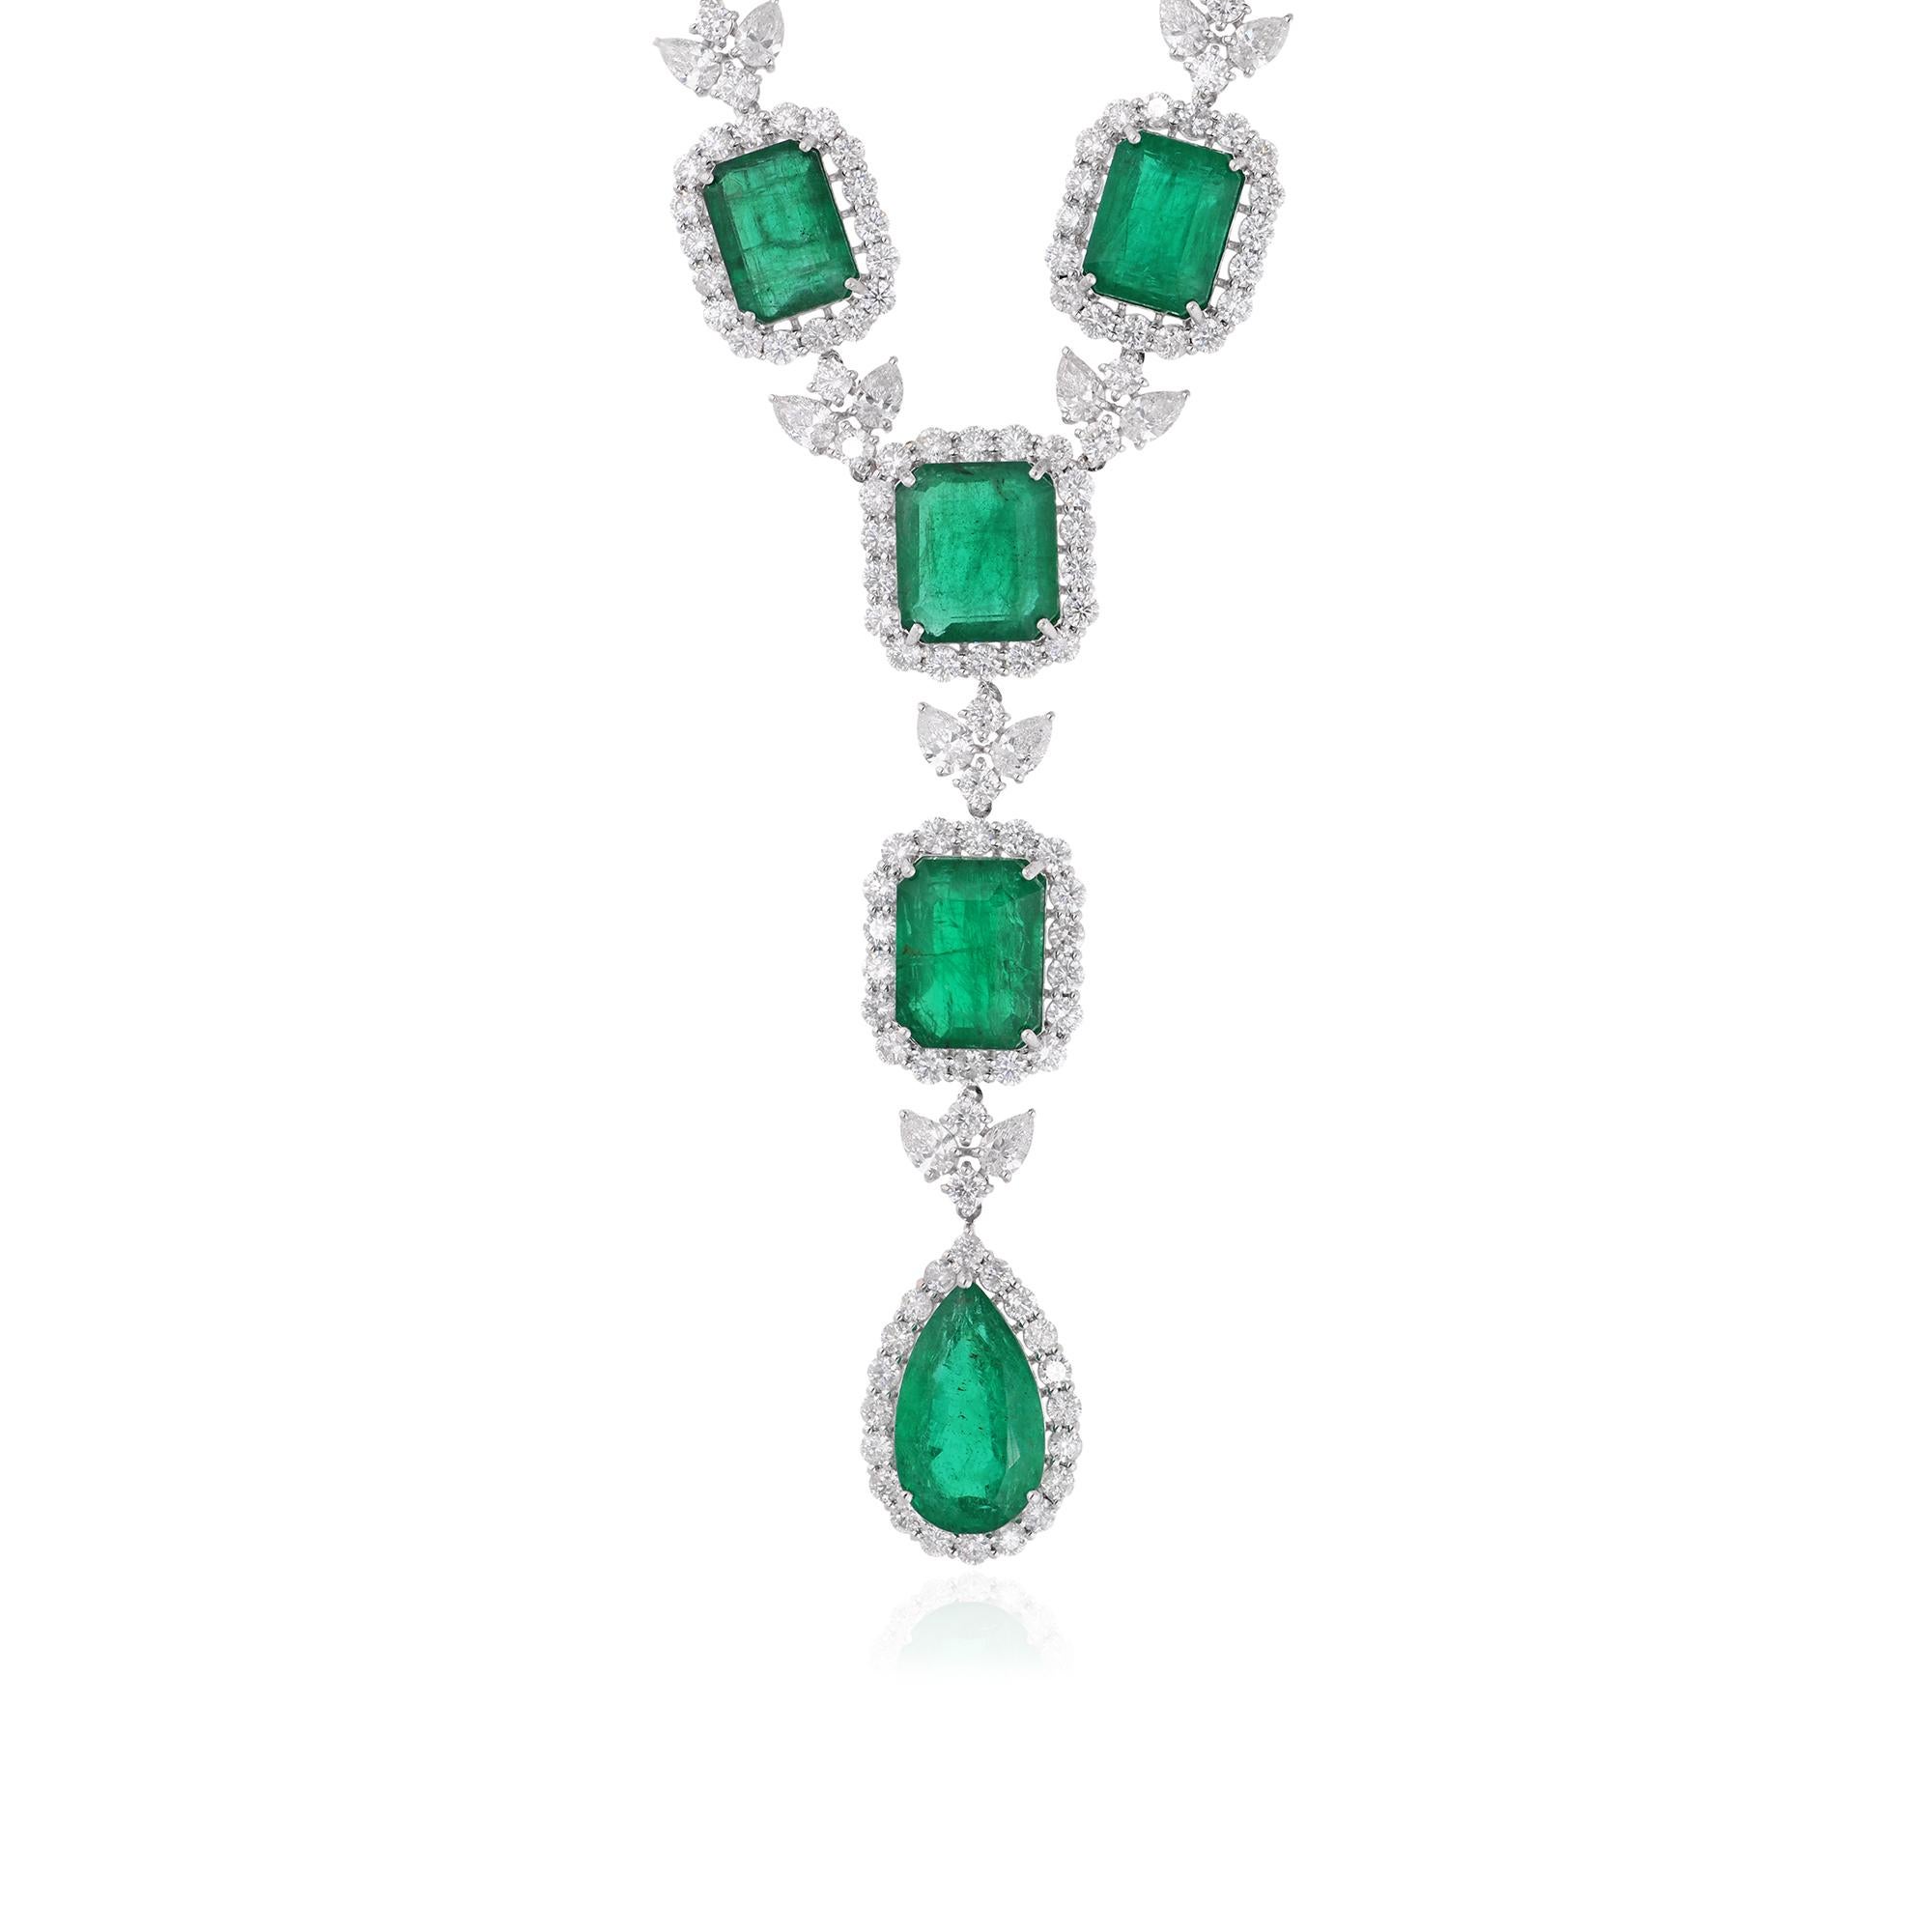 Immerse yourself in the captivating allure of this exquisite Zambian Emerald Gemstone Necklace, adorned with dazzling diamonds and meticulously handcrafted in luminous 14 karat white gold. This stunning piece of handmade jewelry is a true embodiment